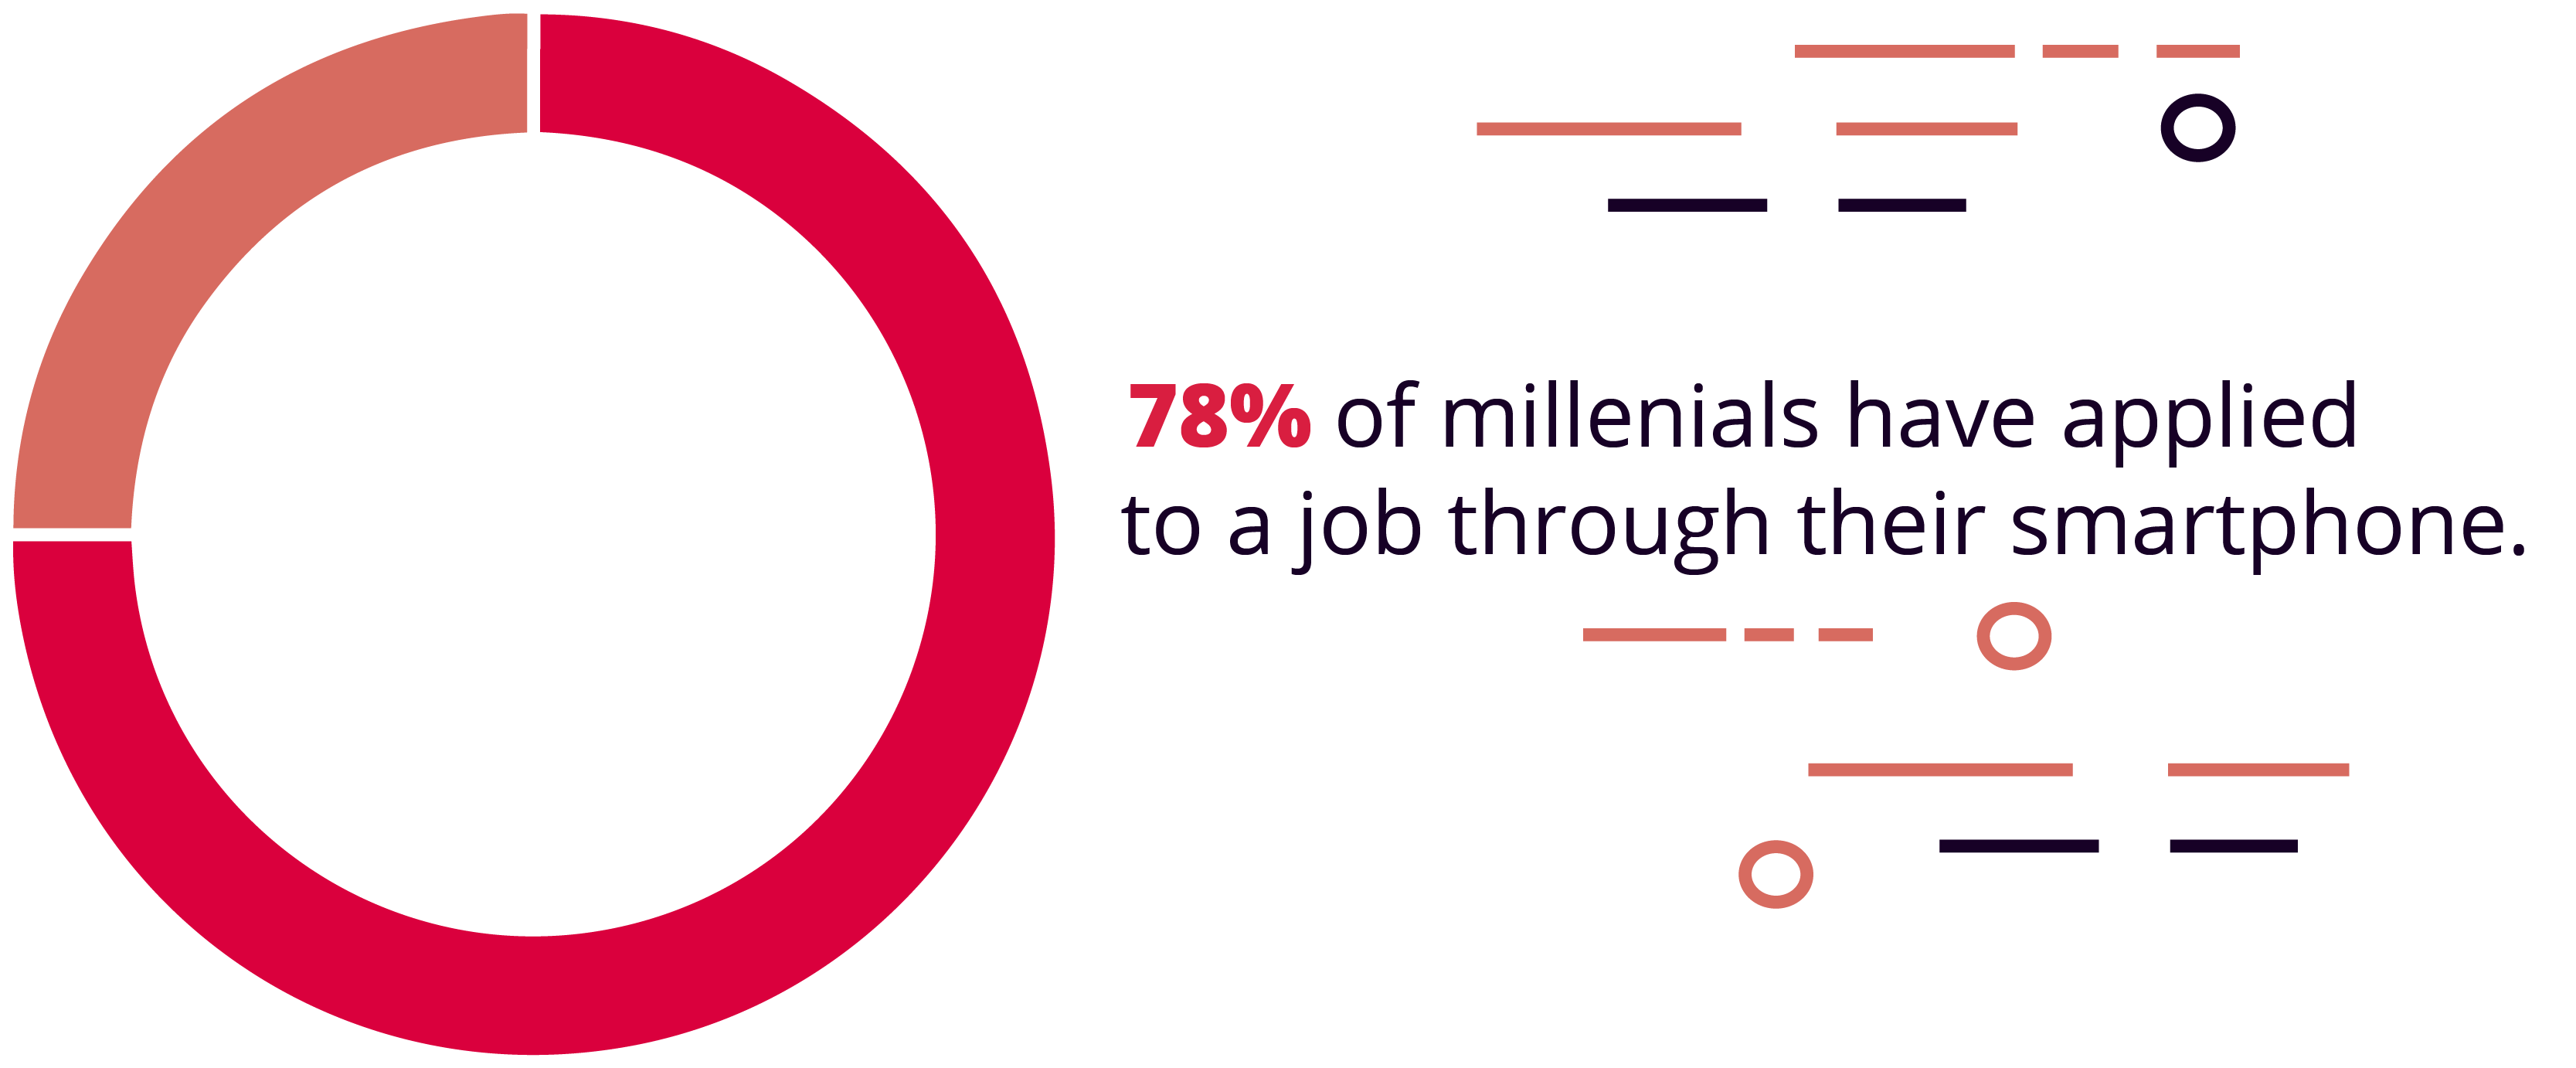 78% of millennials have applied to a job through their smartphone